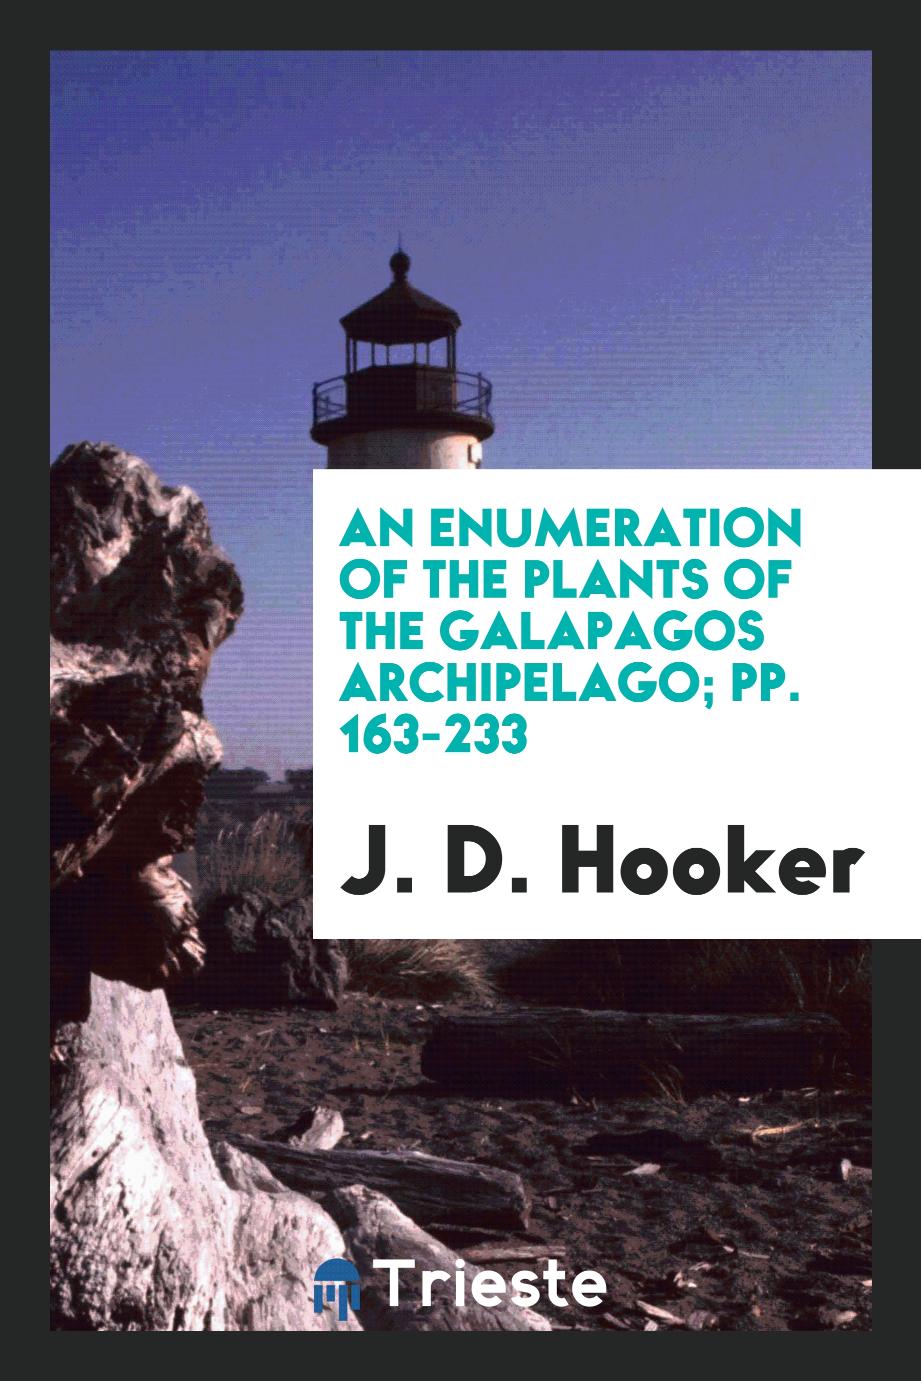 An enumeration of the plants of the Galapagos Archipelago; pp. 163-233